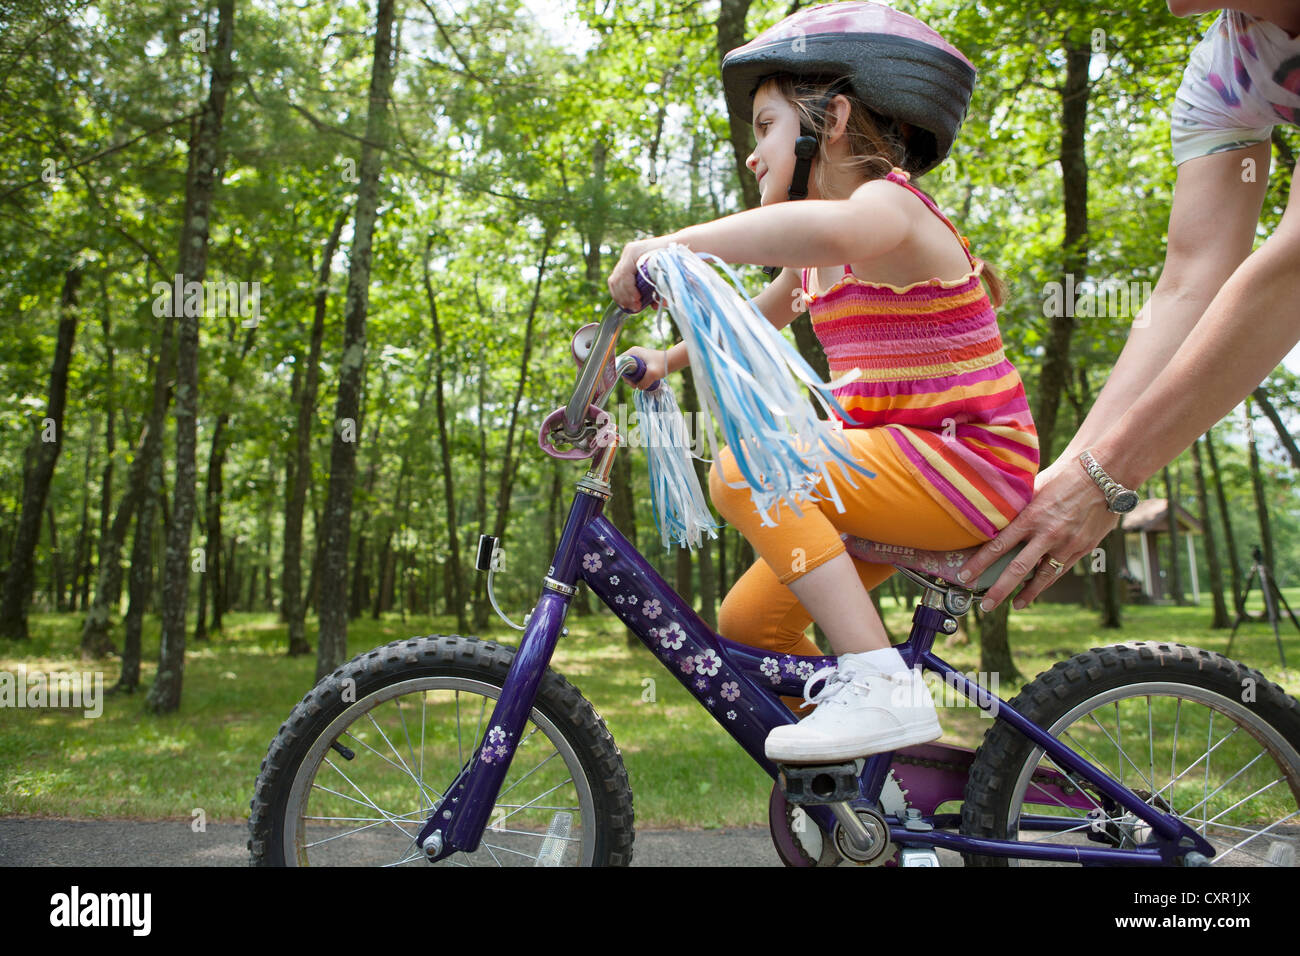 Mother helping daughter to ride bicycle Stock Photo